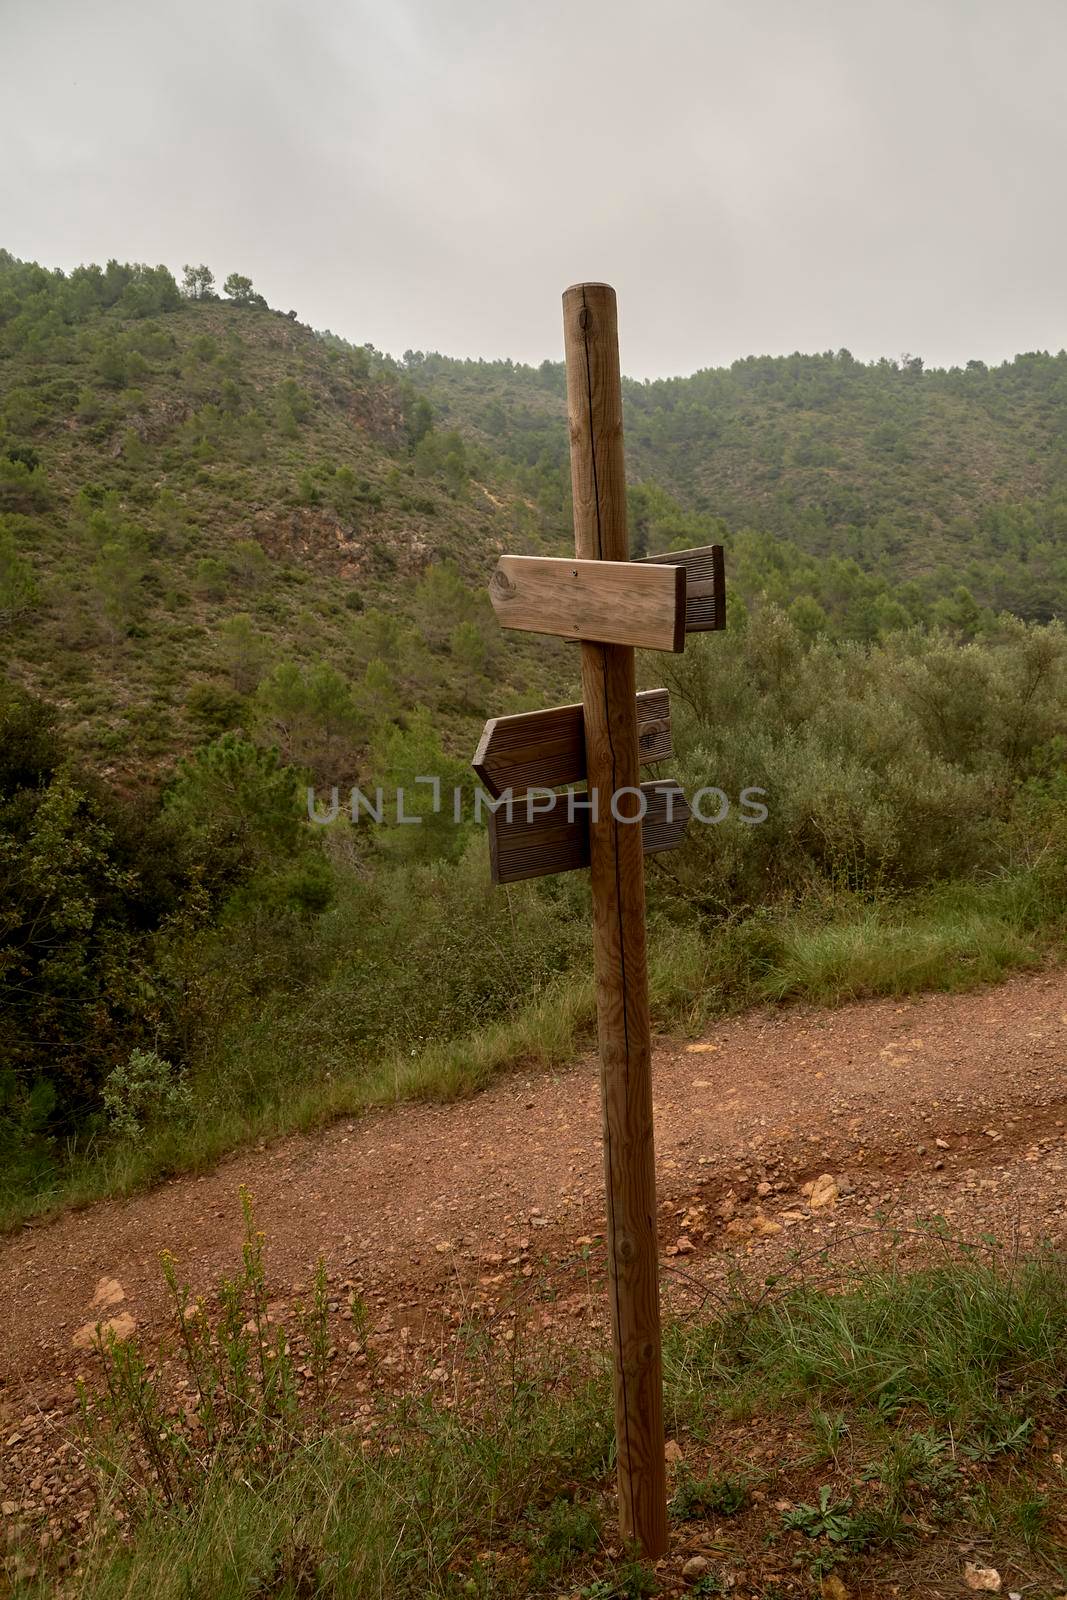 Wooden post with signposts in the forest. Empty space, pine trees, sky stones